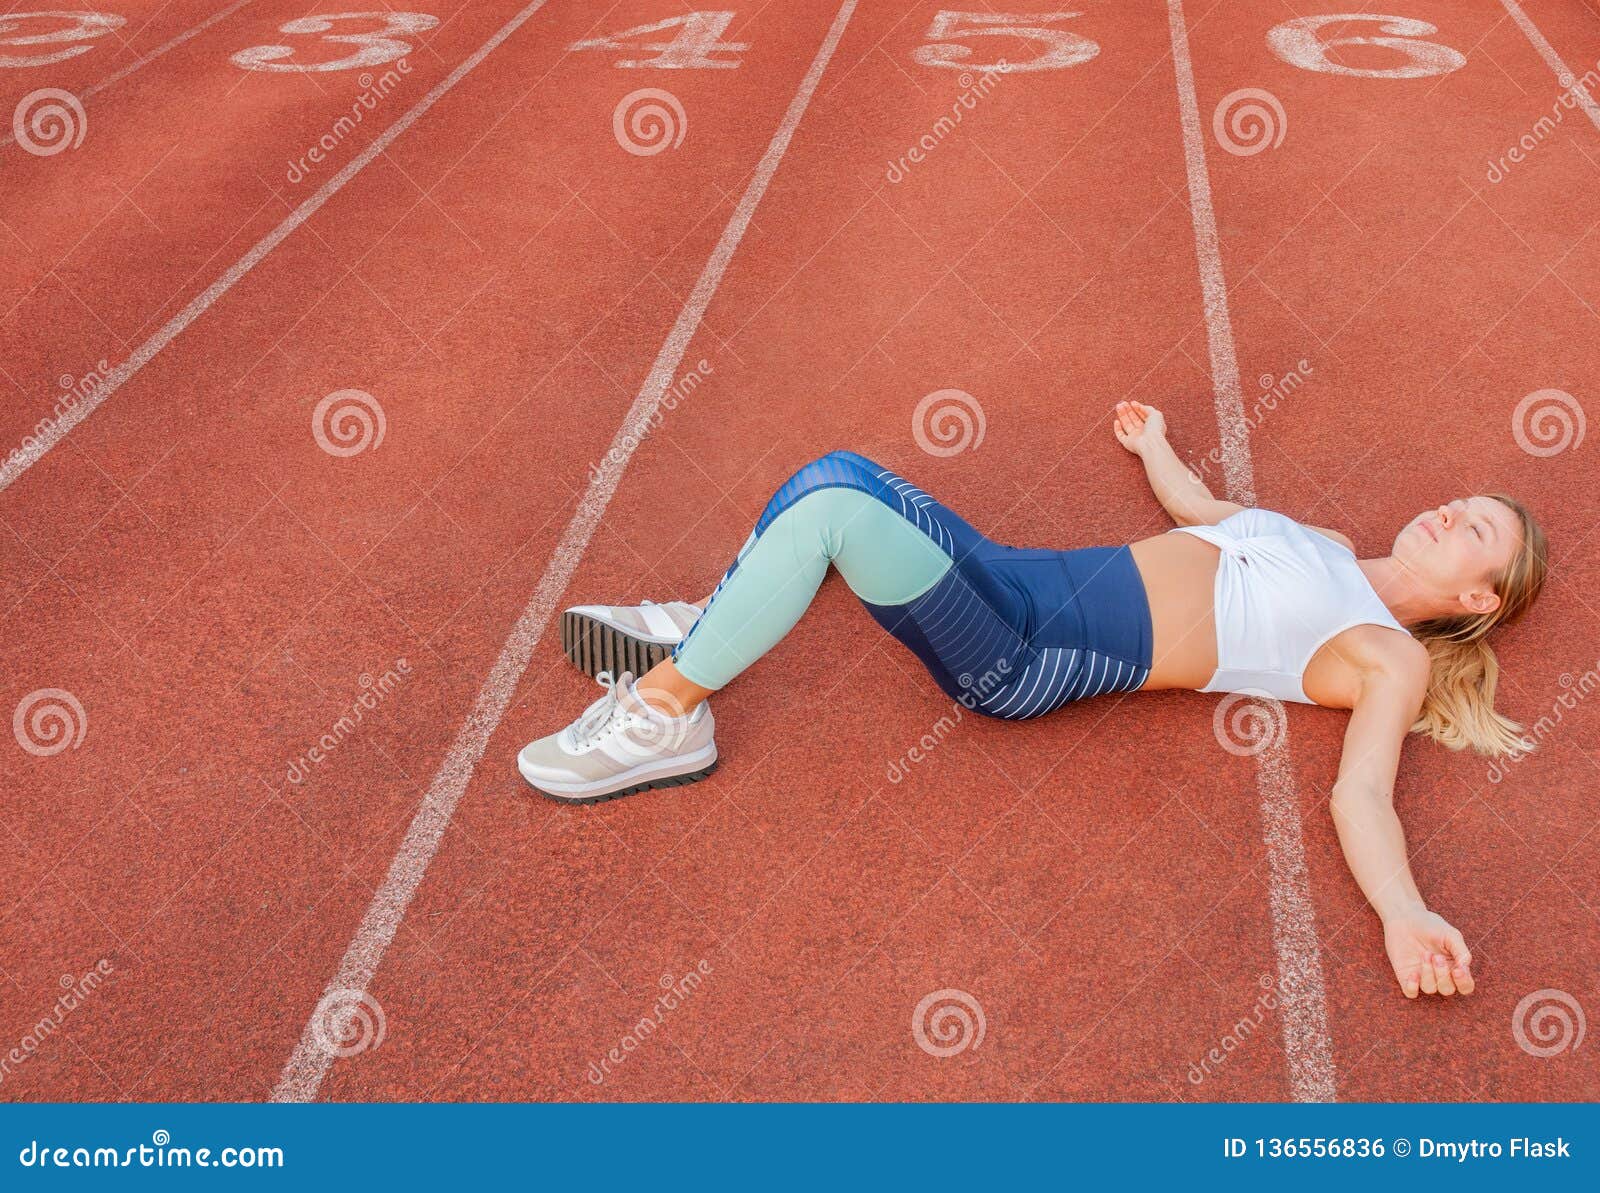 Tired Woman Runner Taking A Rest After Run Lying On The ...